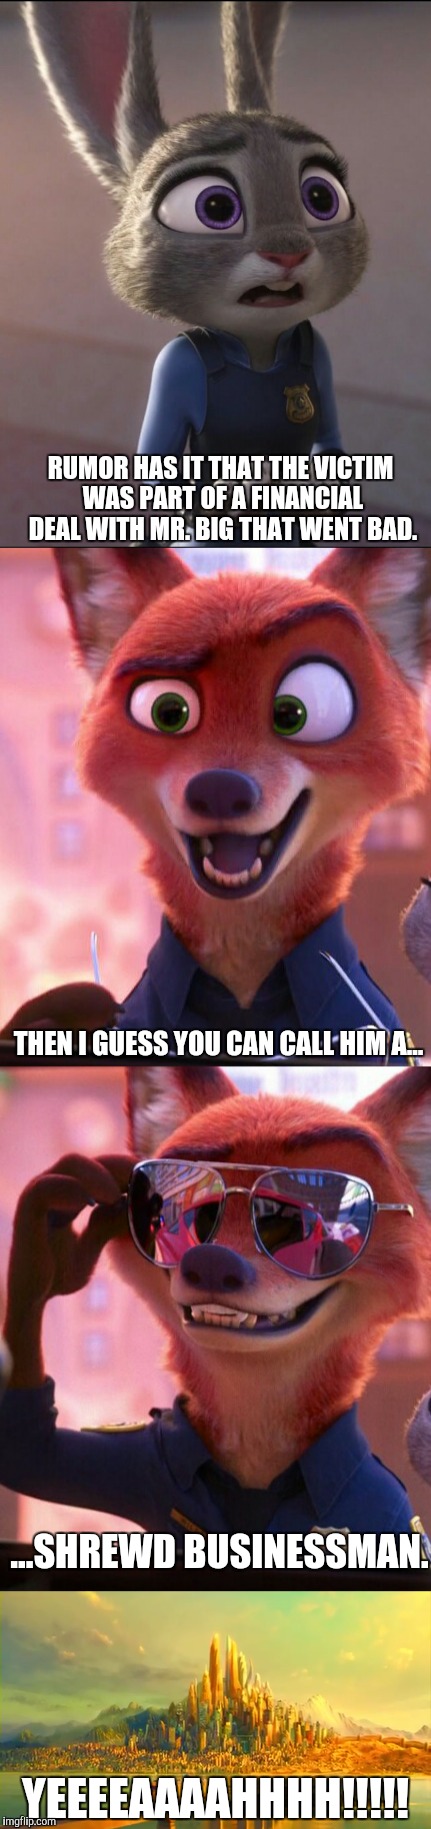 CSI: Zootopia 2 | RUMOR HAS IT THAT THE VICTIM WAS PART OF A FINANCIAL DEAL WITH MR. BIG THAT WENT BAD. THEN I GUESS YOU CAN CALL HIM A... ...SHREWD BUSINESSMAN. YEEEEAAAAHHHH!!!!! | image tagged in zootopia,judy hopps,nick wilde,parody,funny,memes | made w/ Imgflip meme maker